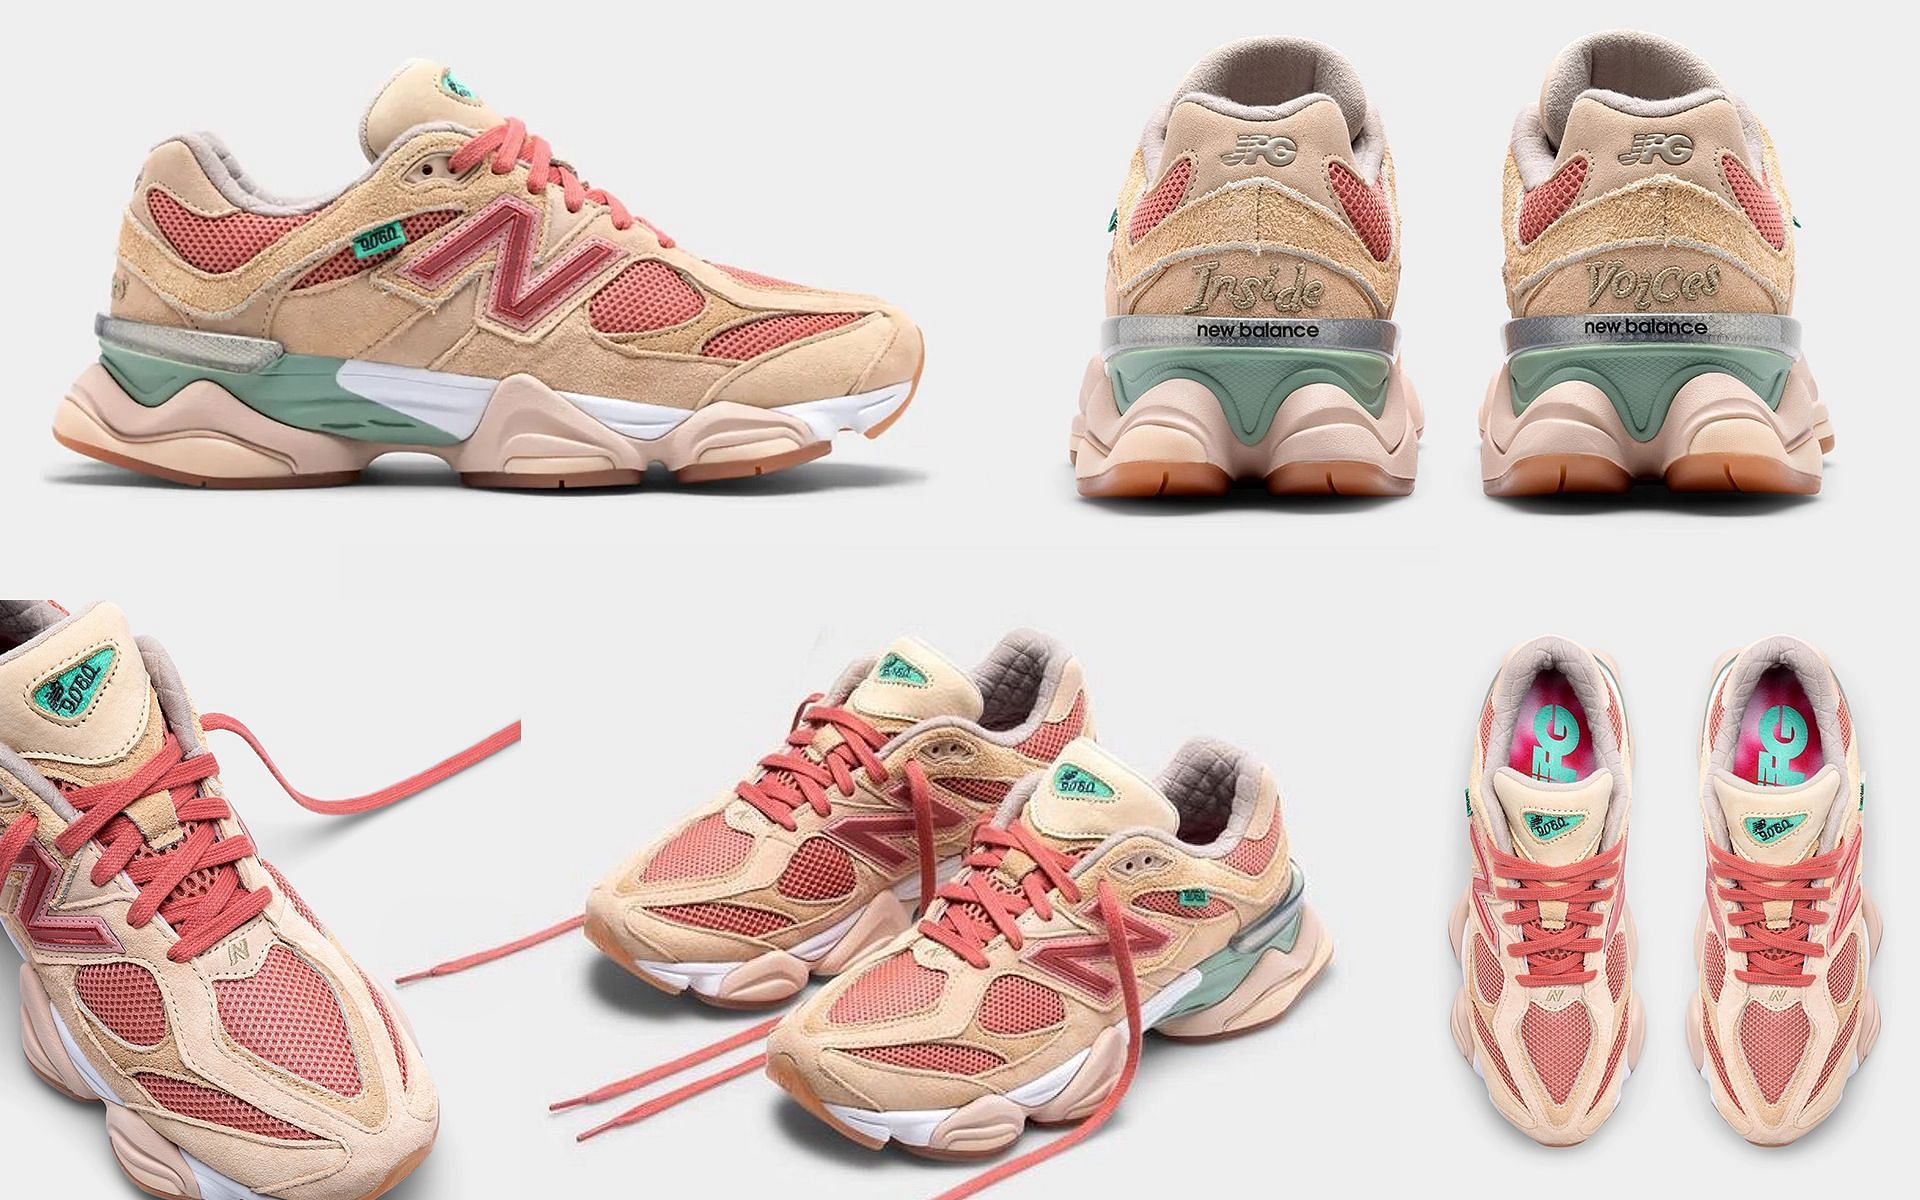 5 New Balance Colorways That Released In 2022